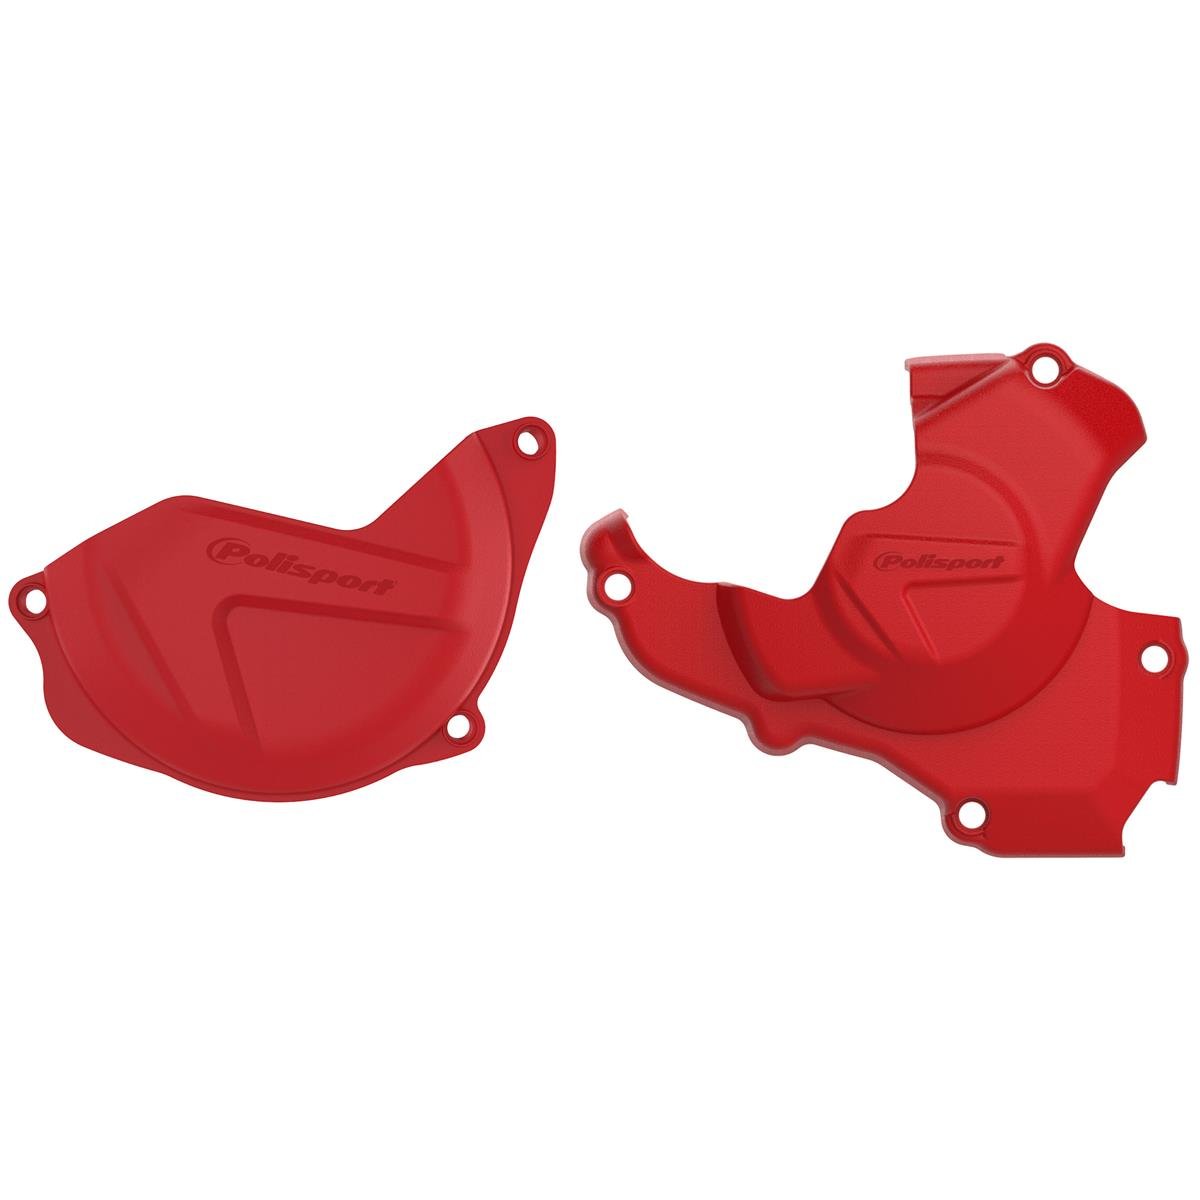 Polisport Clutch/Ignition Cover Protection  Honda CRF 450 10-16, Red